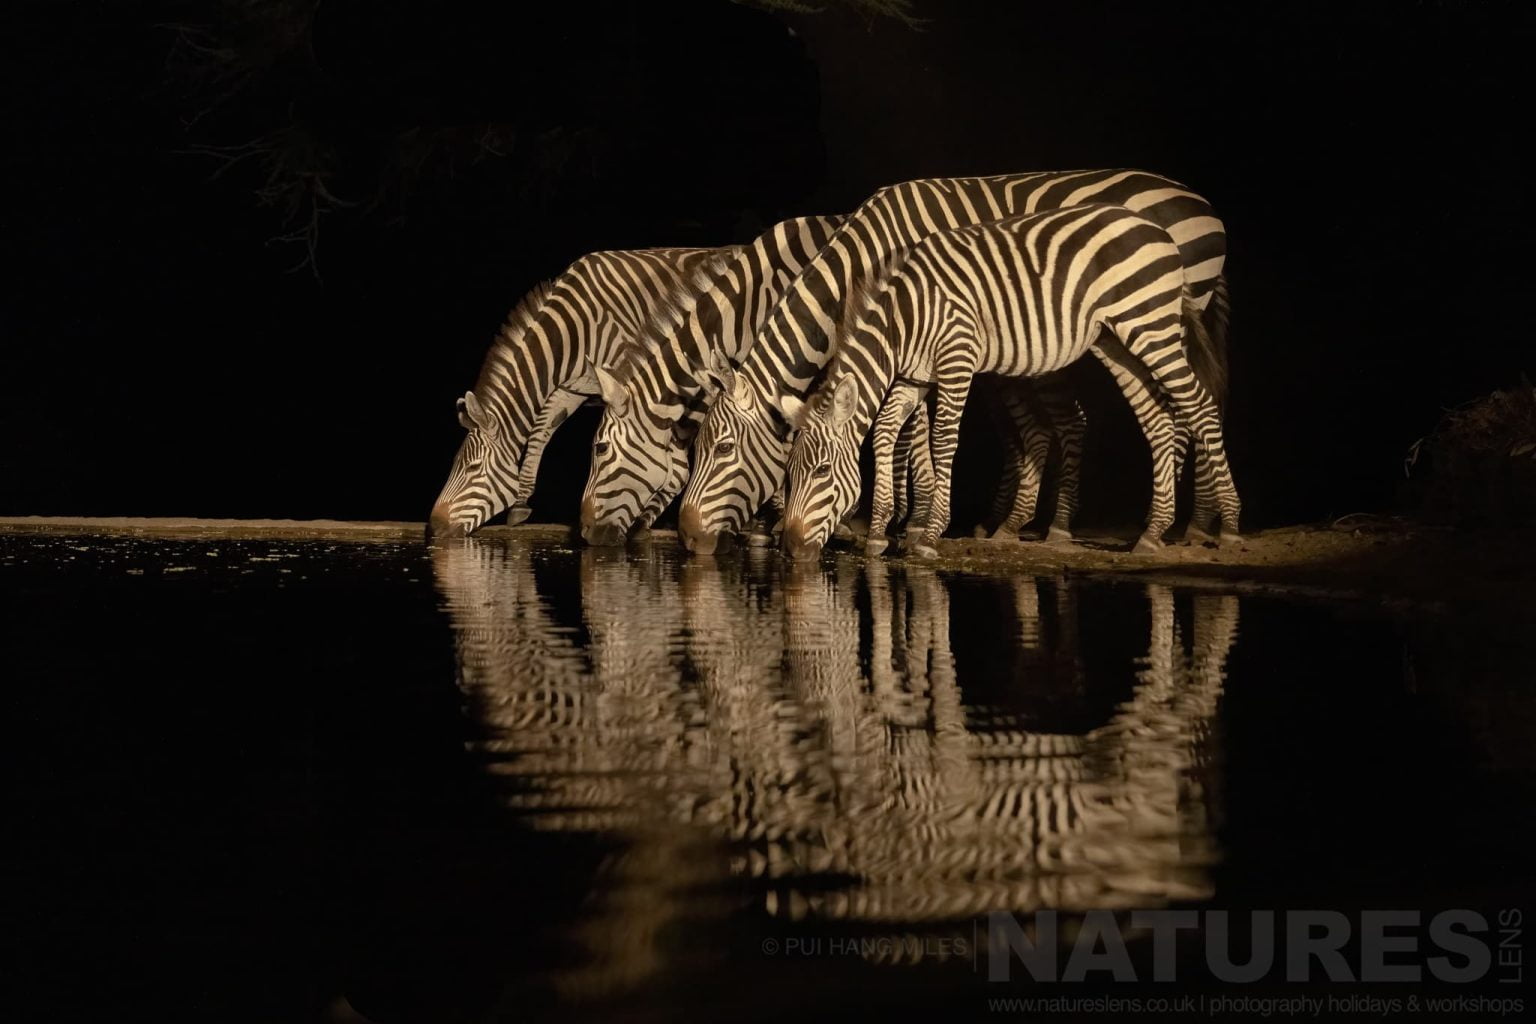 A Quartet Of Zebra Photographed At Night From The Hide That Is Available To Guests Joining What Natureslens Consider To Be The Ultimate African Wildlife Holiday In Kenya'S Rift Valley